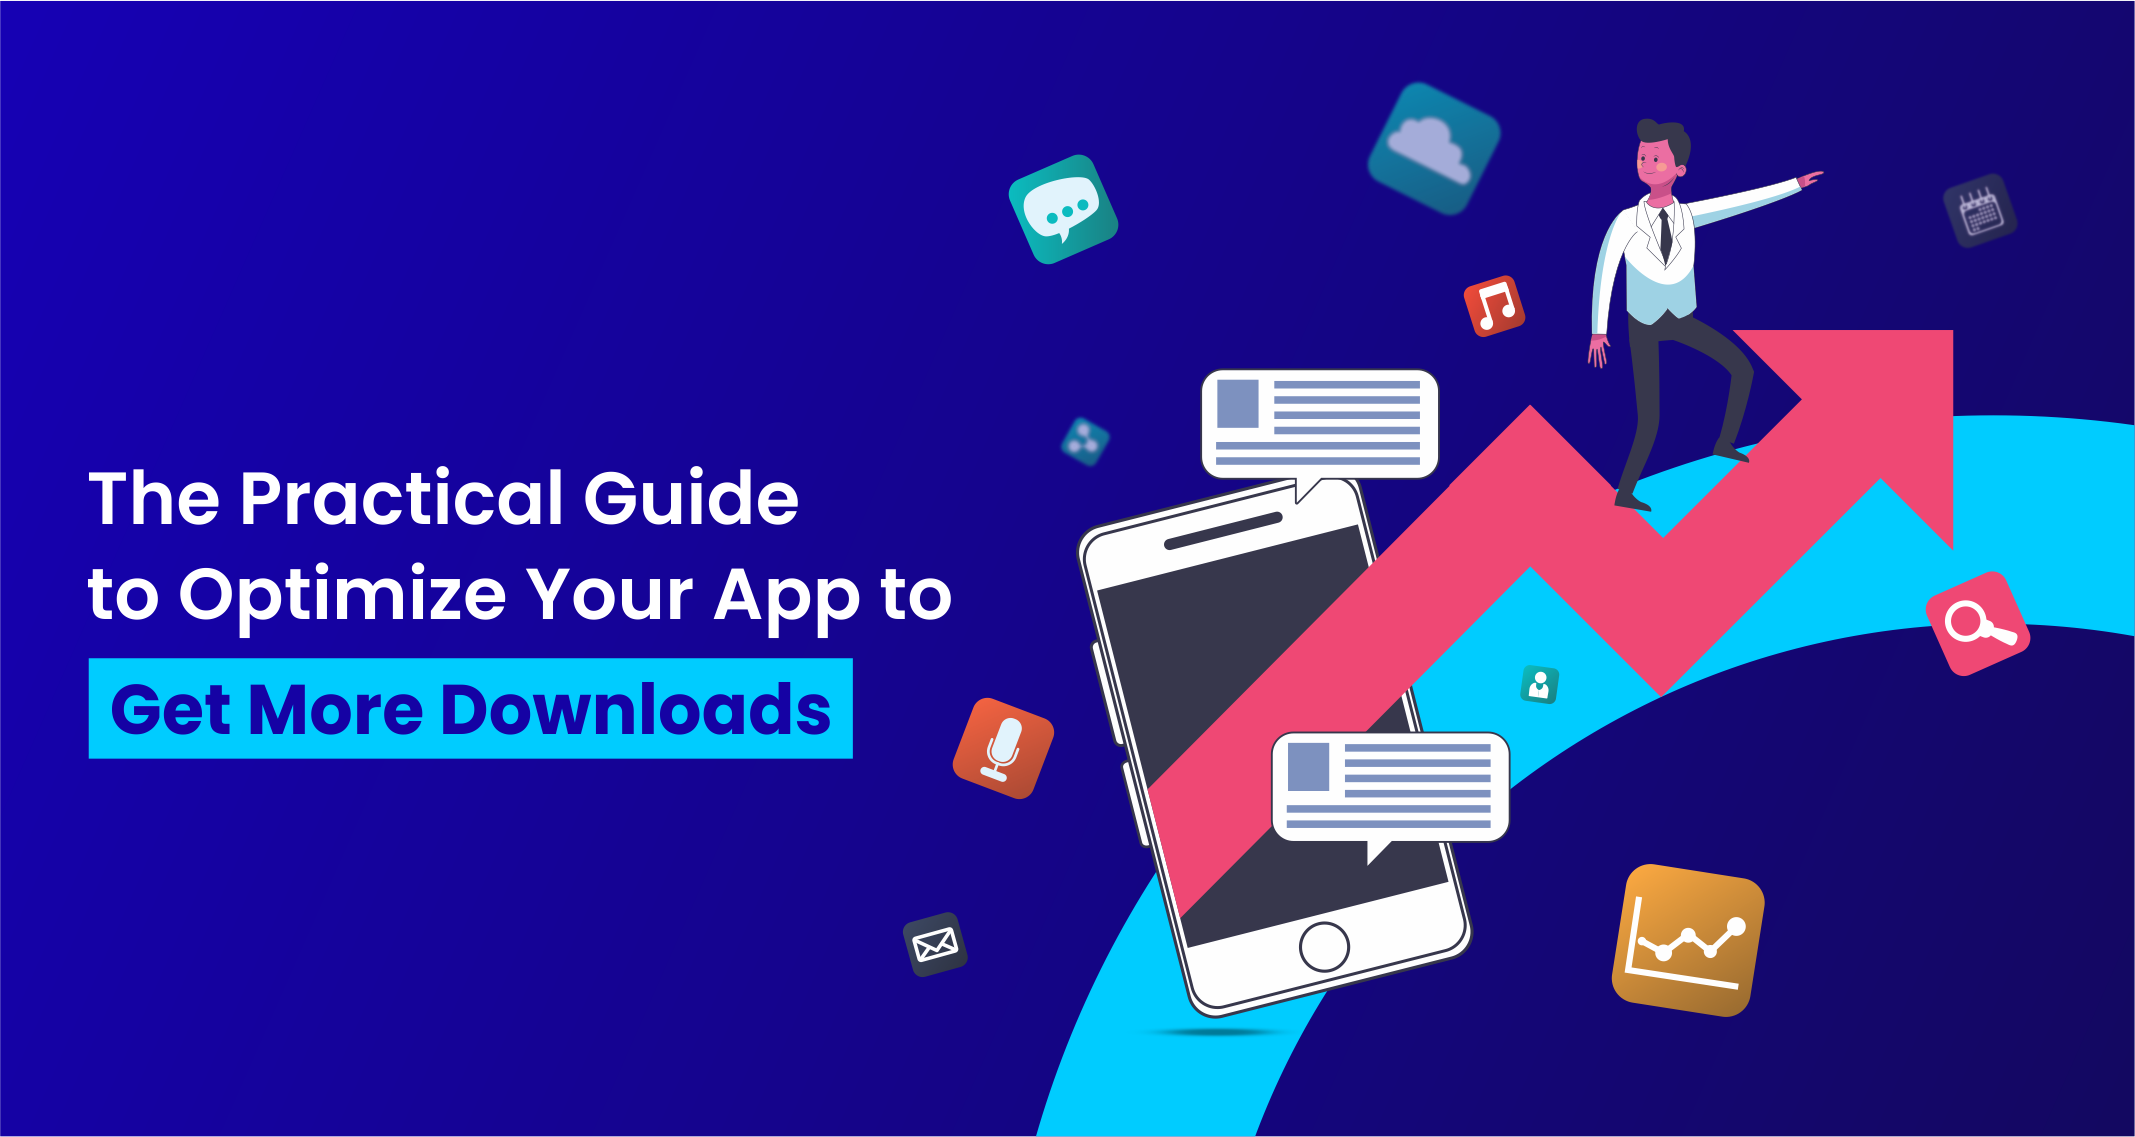 The Practical Guide to Optimize Your App to Get More Downloads